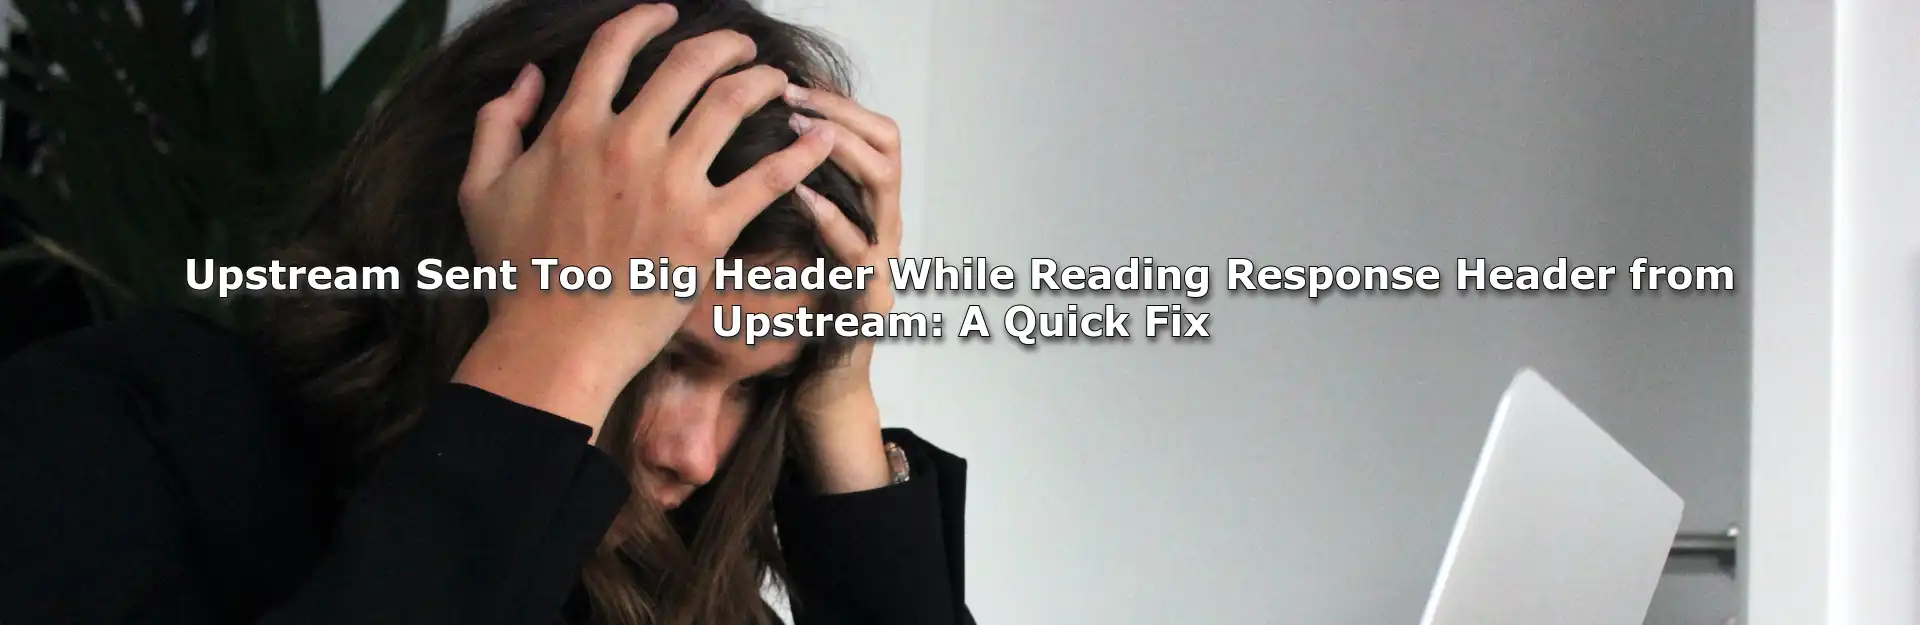 Upstream Sent Too Big Header While Reading Response Header from Upstream: A Quick Fix